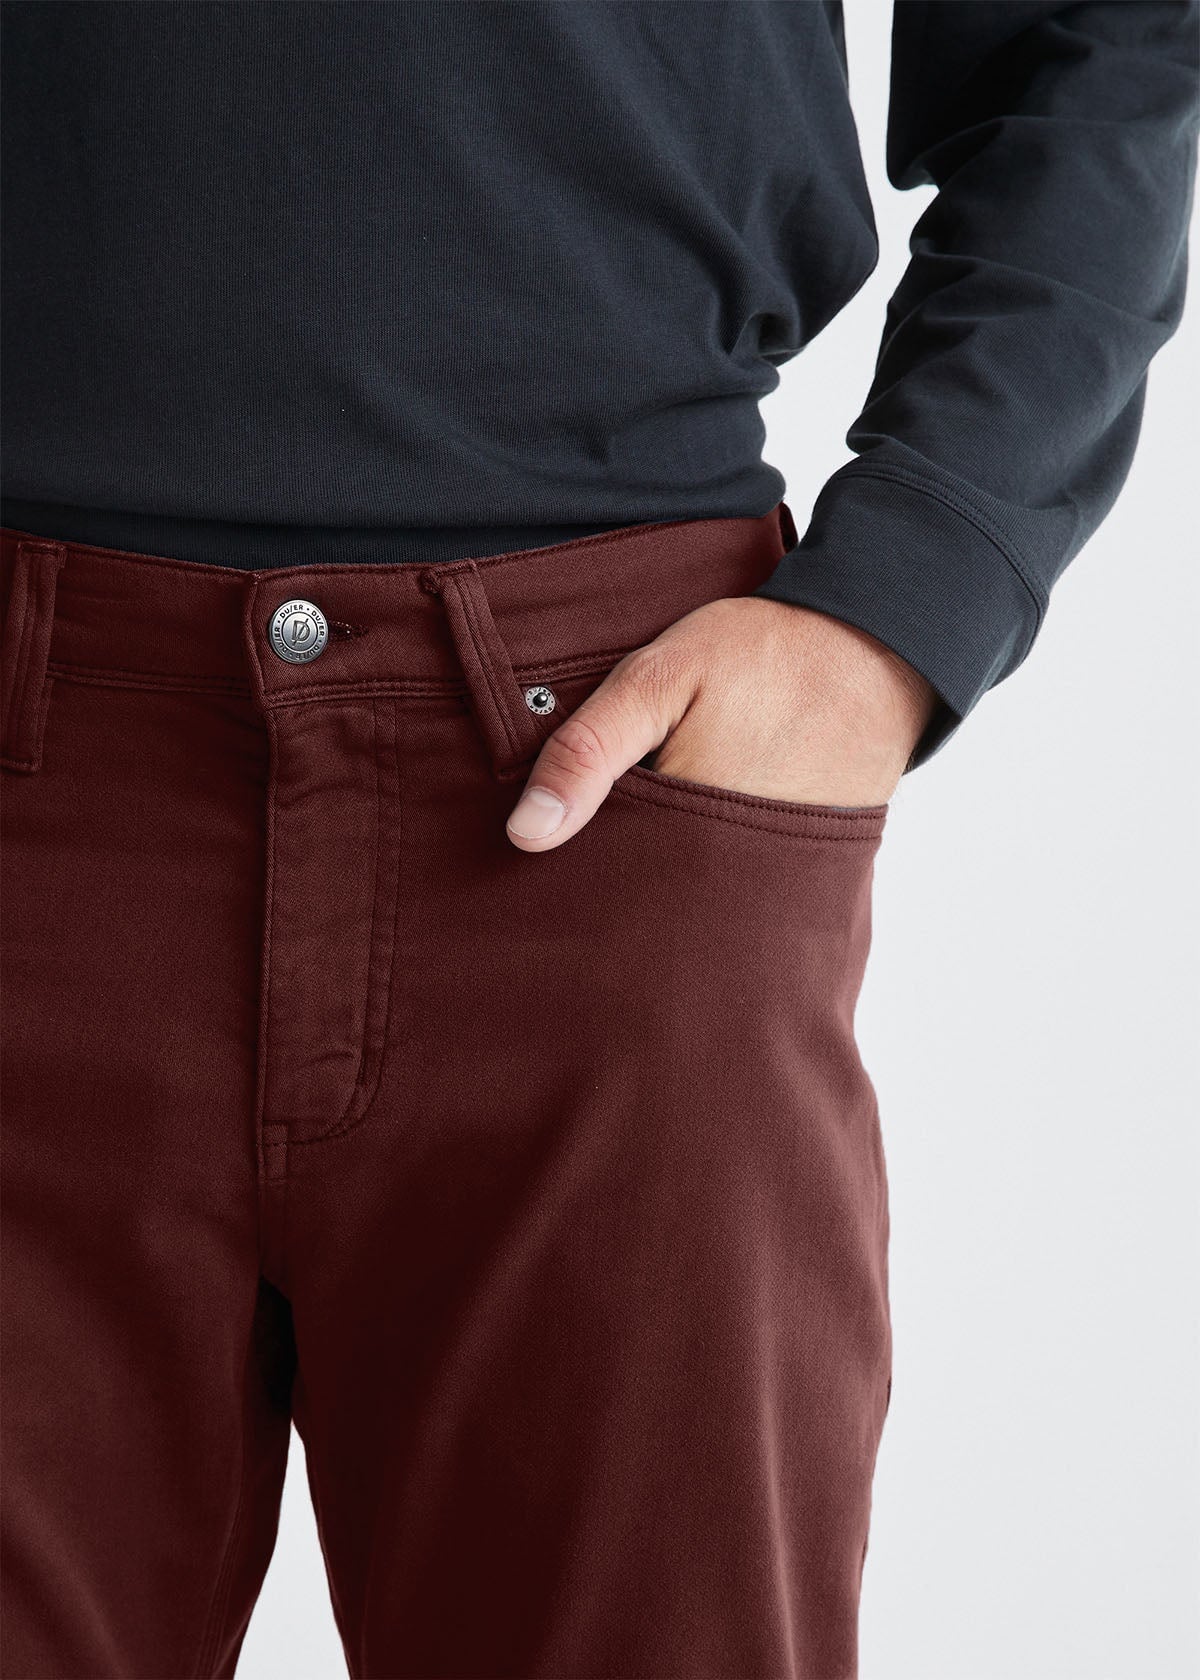 mens dark red relaxed fit dress sweatpant front waistband detail